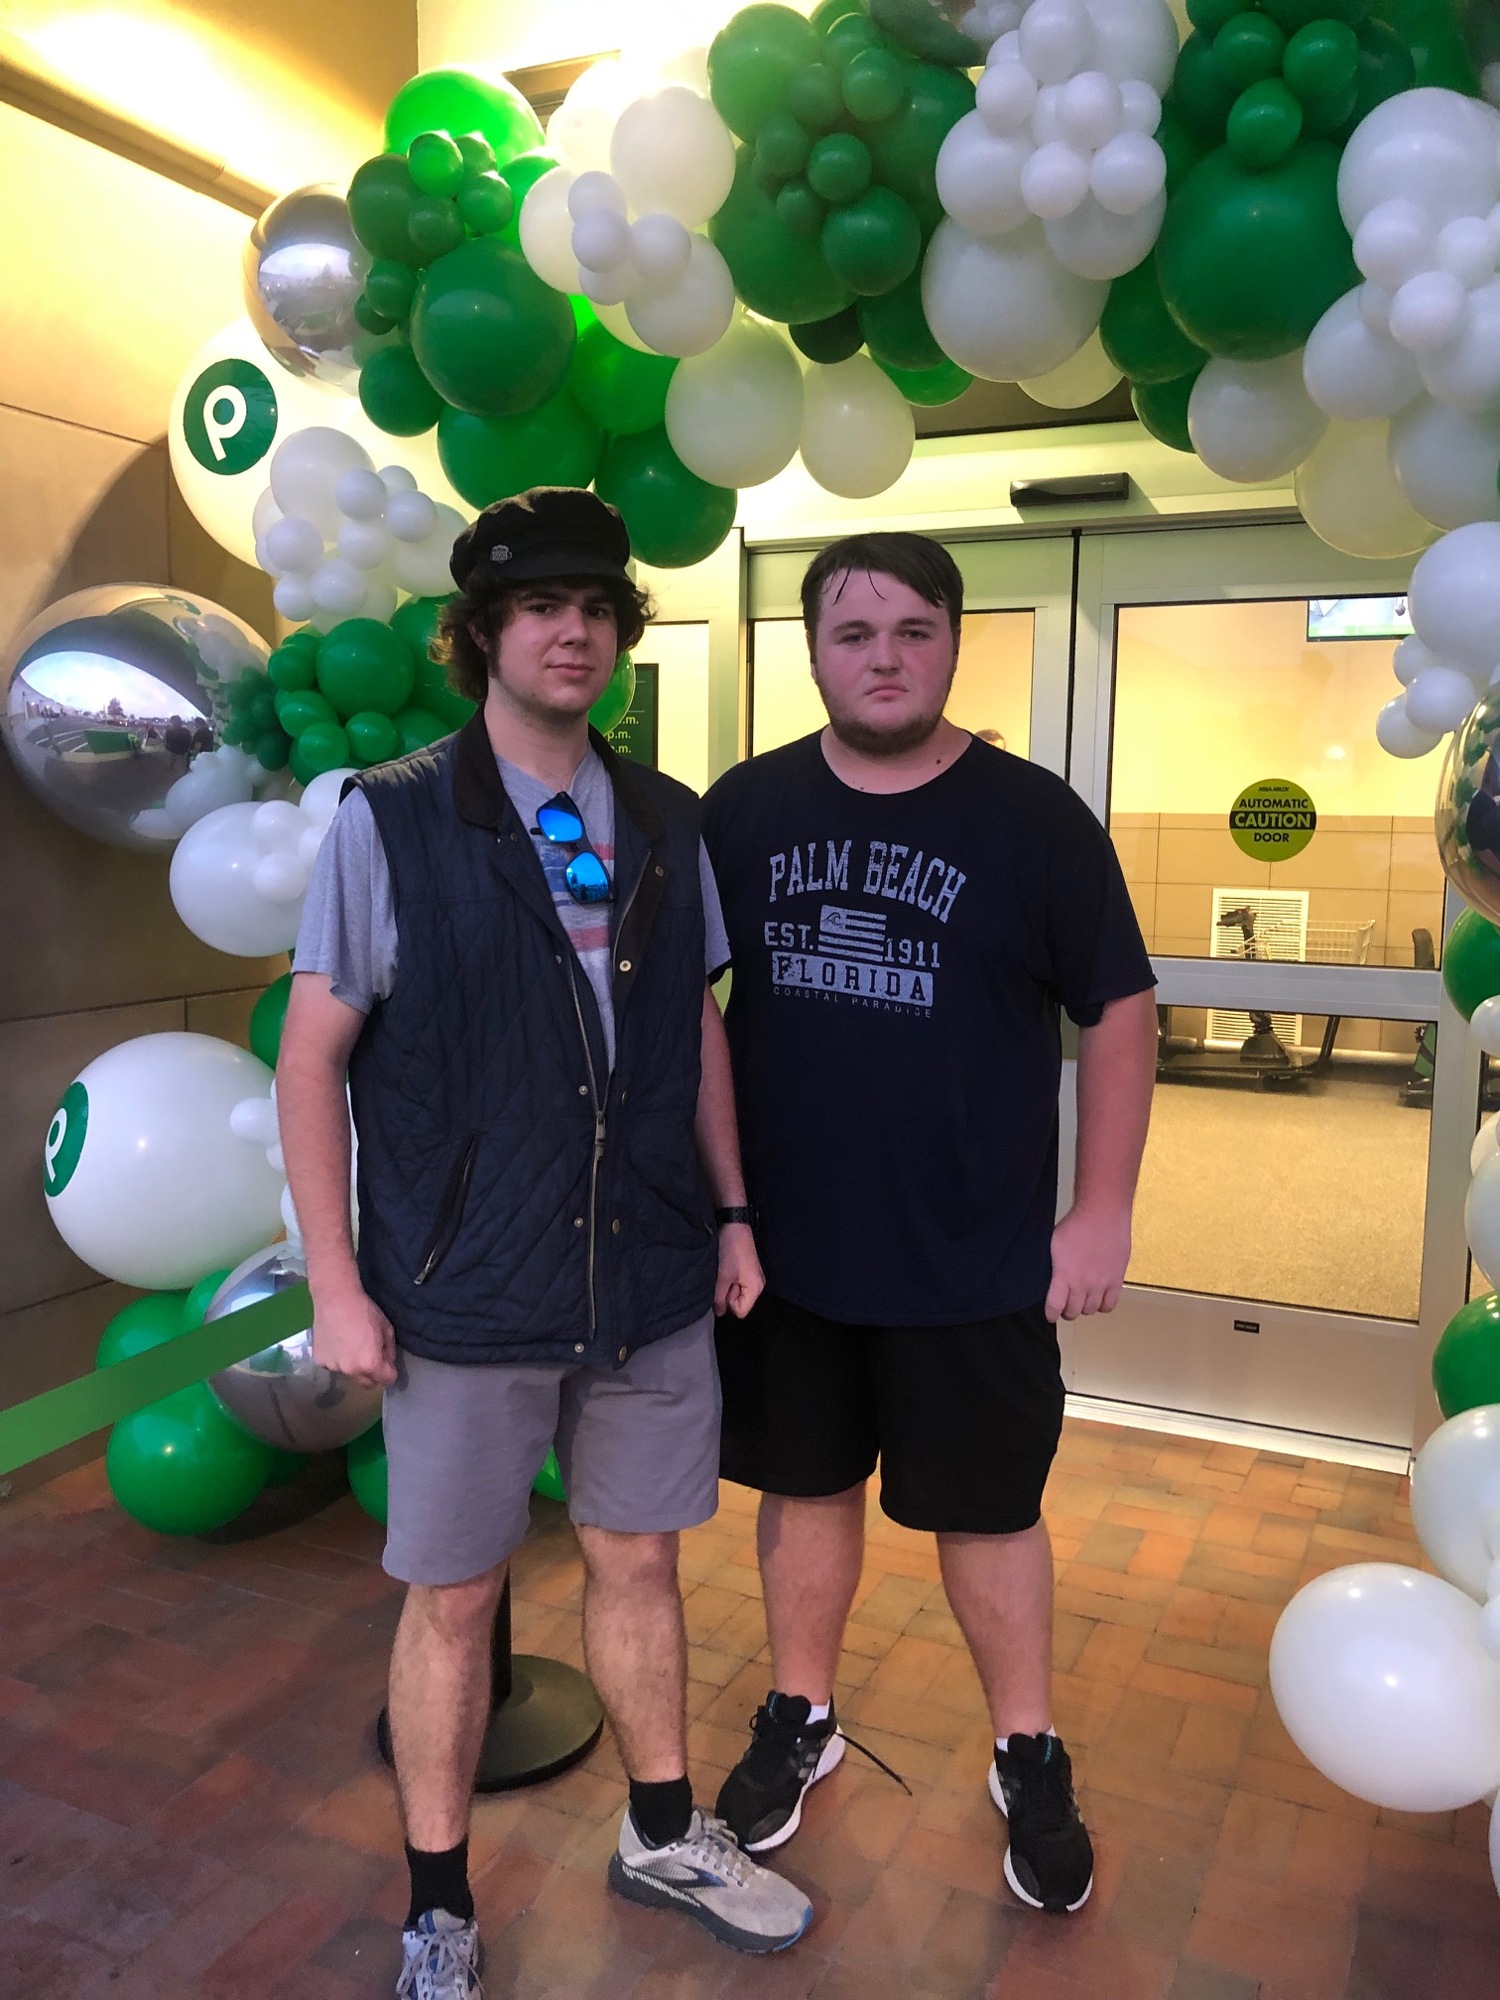 Douglas Anderson School of the Arts senior Luke Whipple, left, was first in line with his friend, UNF student Ernest Soles, second.